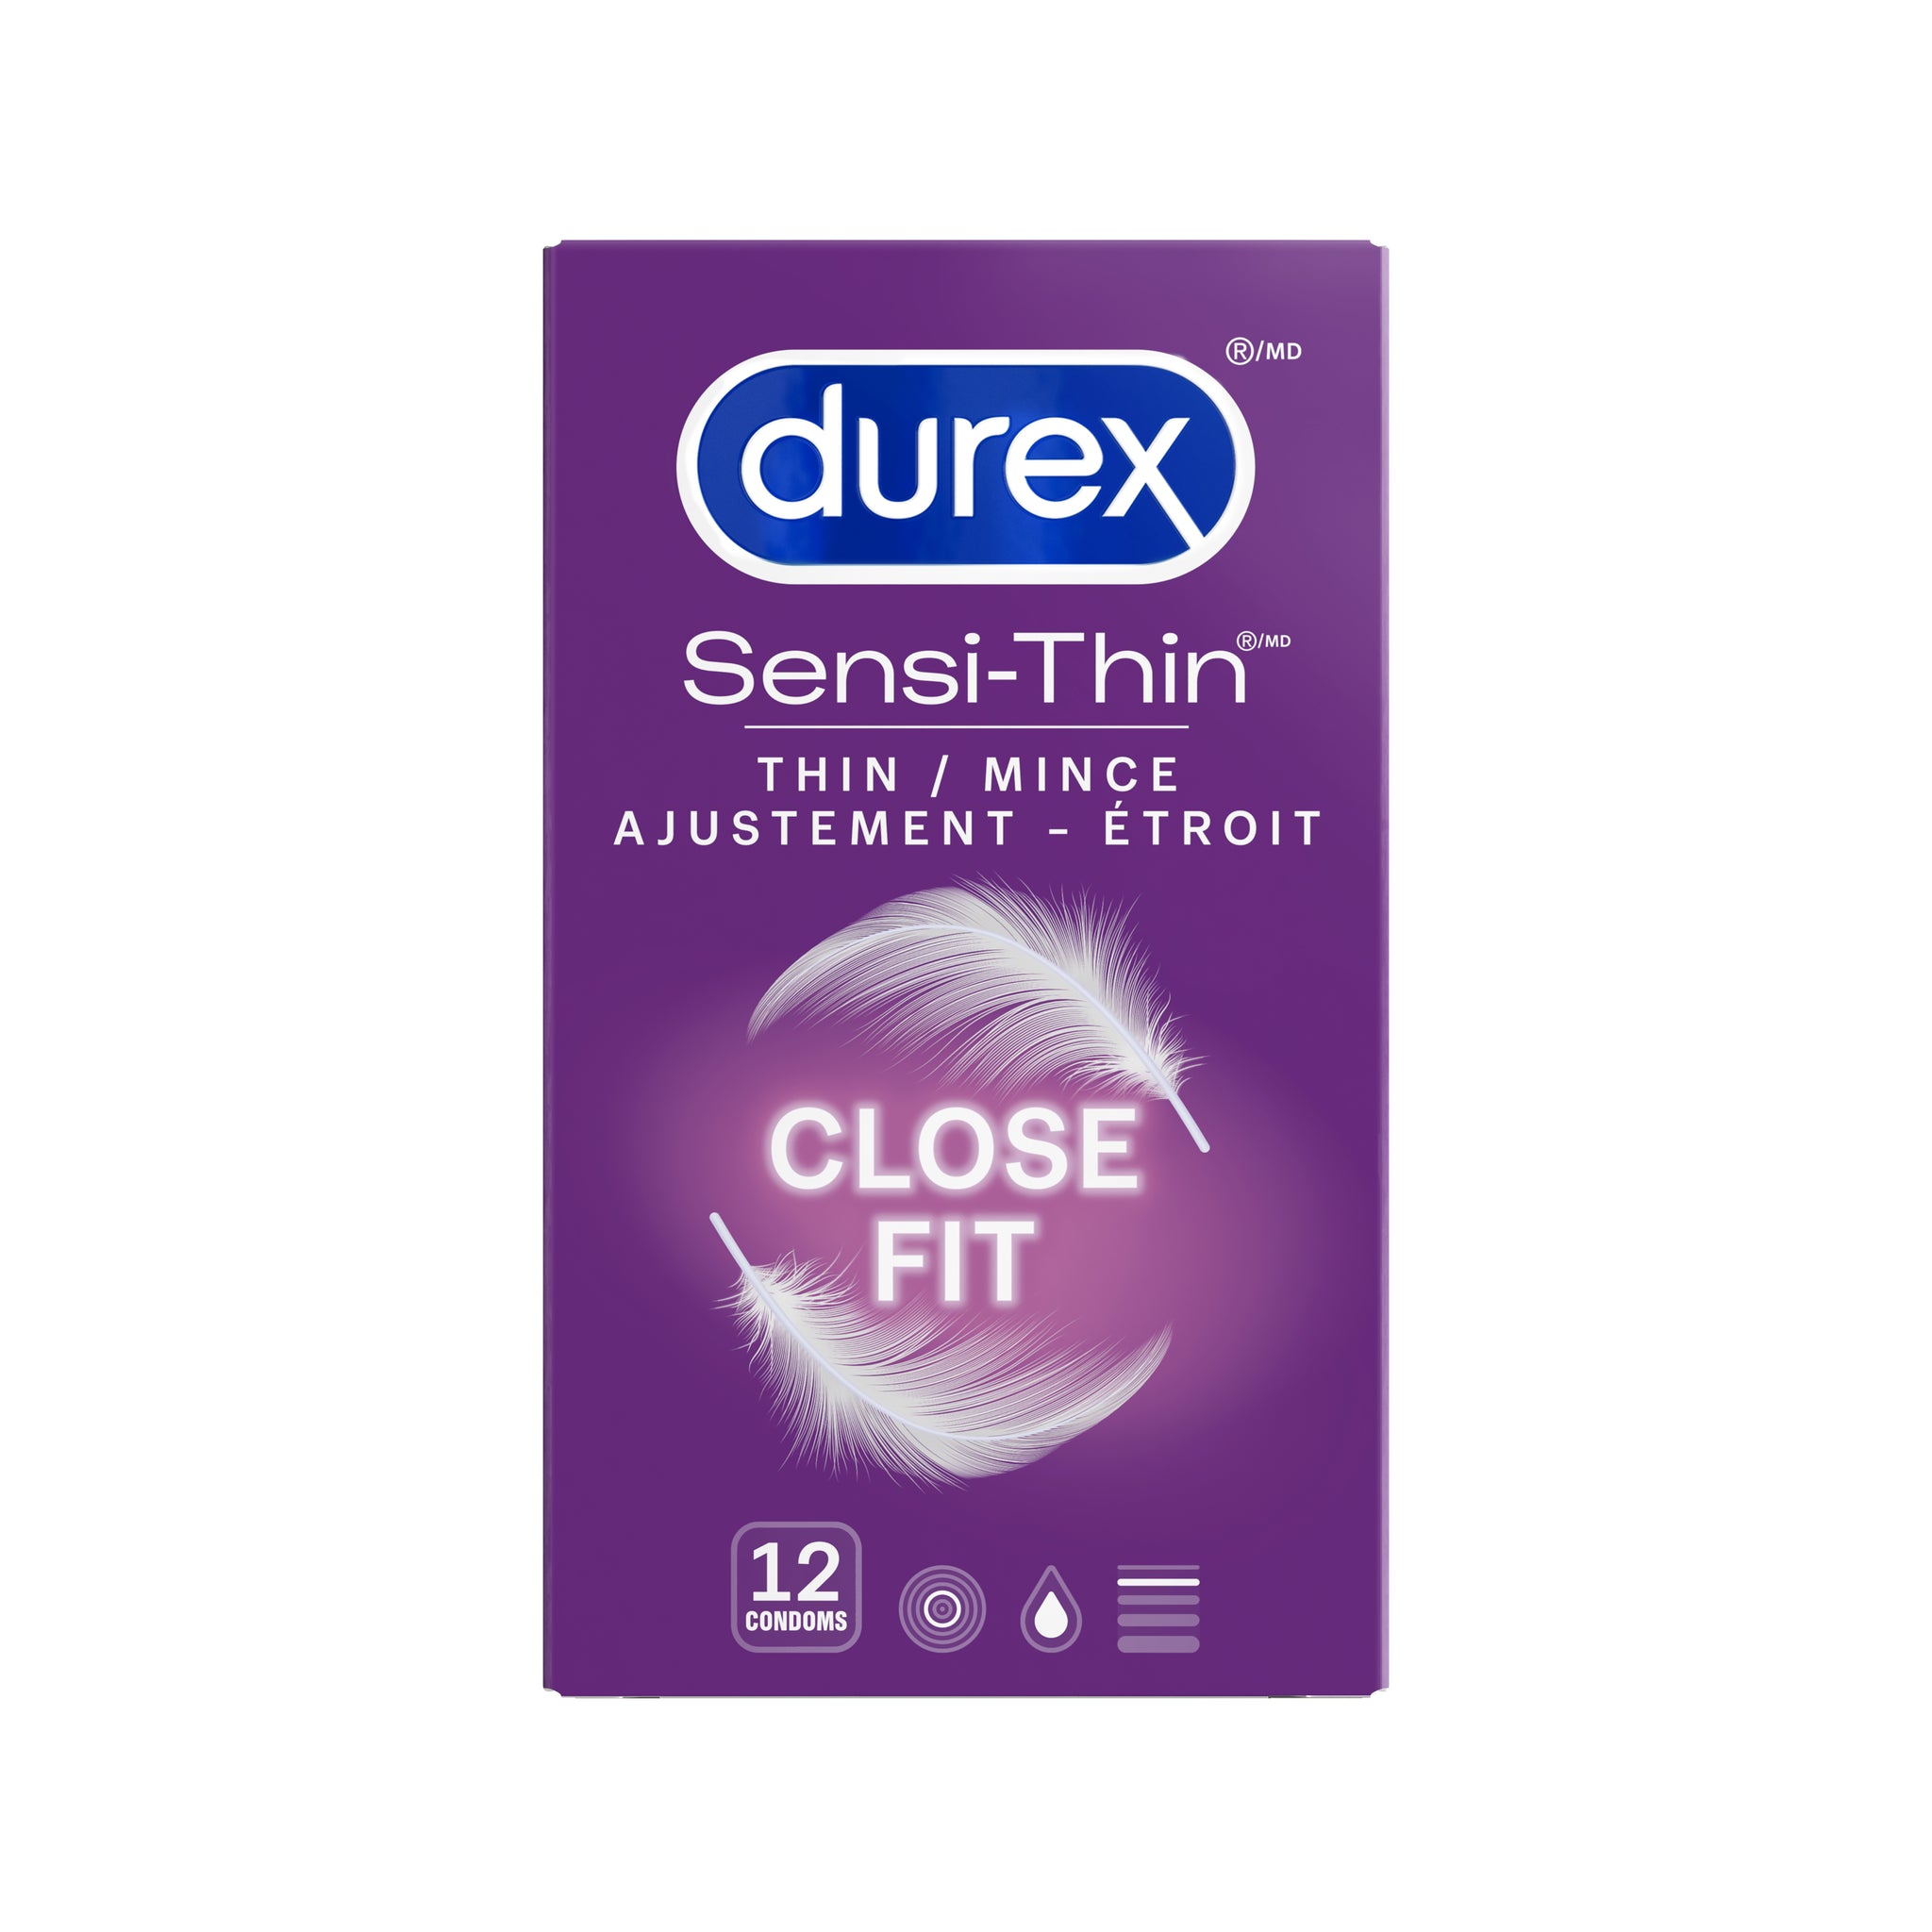 Durex Extra Smooth Invisible Extra Thin Lubricated Condoms reviews in  Sexual Health - ChickAdvisor